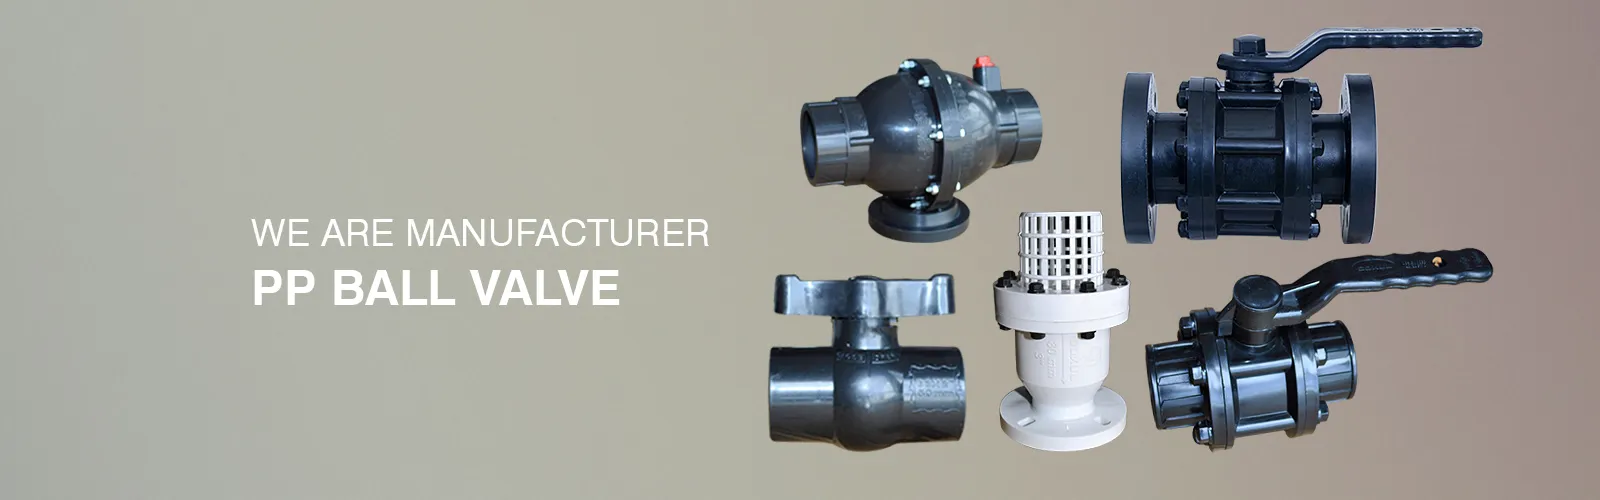 PP Ball Valve Manufacturer in India